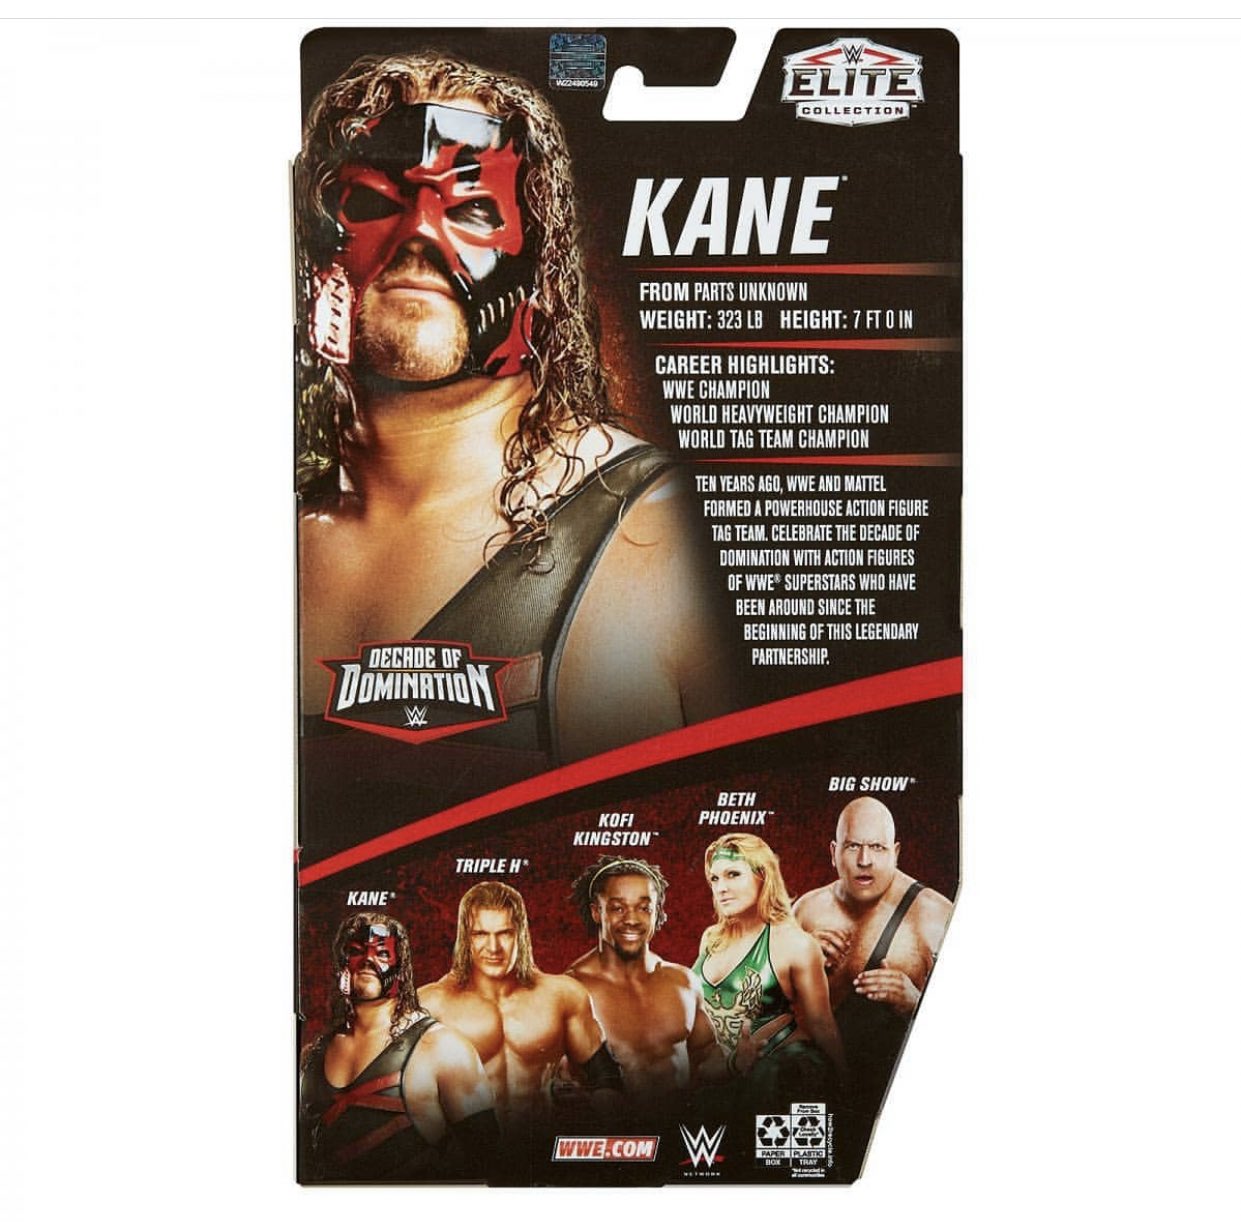 Wrestling Figure News Source Wwe Decade Of Domination Kane Coming Soon To Walmart